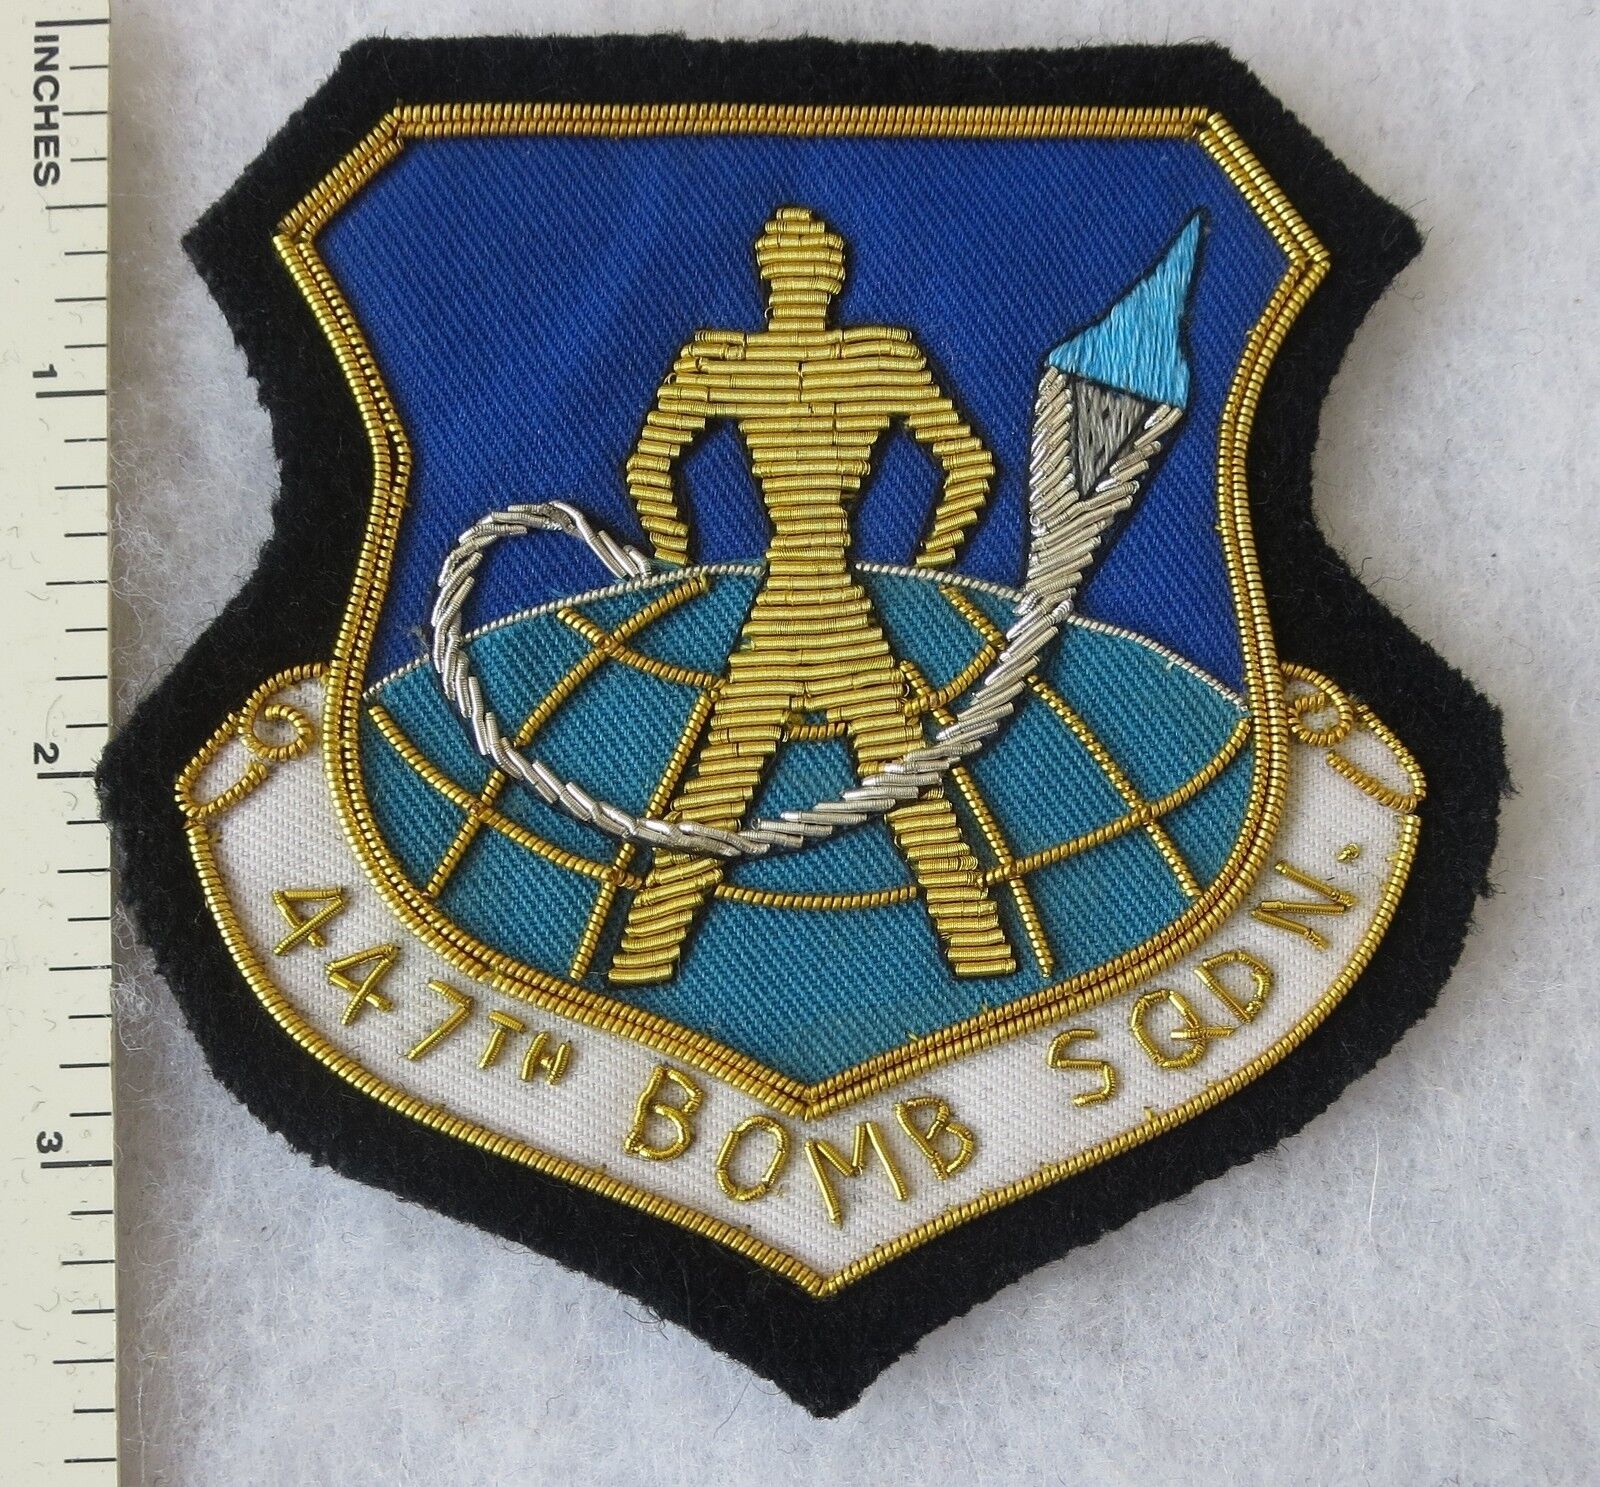 US AIR FORCE 447th BOMB SQUADRON Bullion PATCH Custom Made for USAF VETERANS